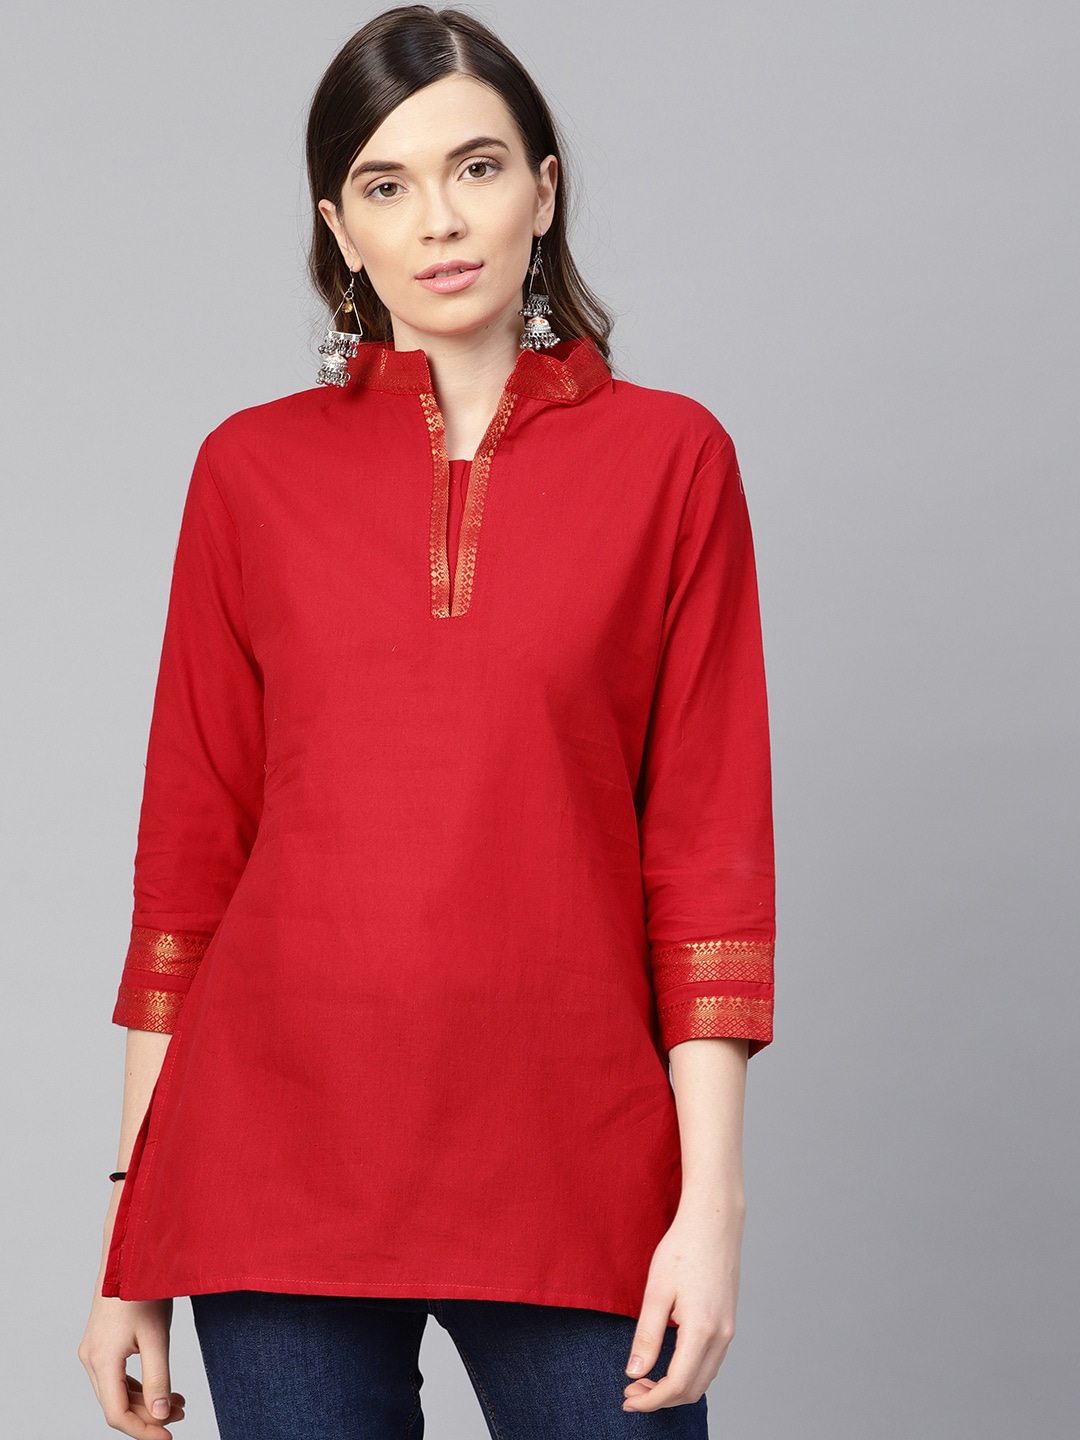 Bhama Couture Women Red Solid Kurti Price in India